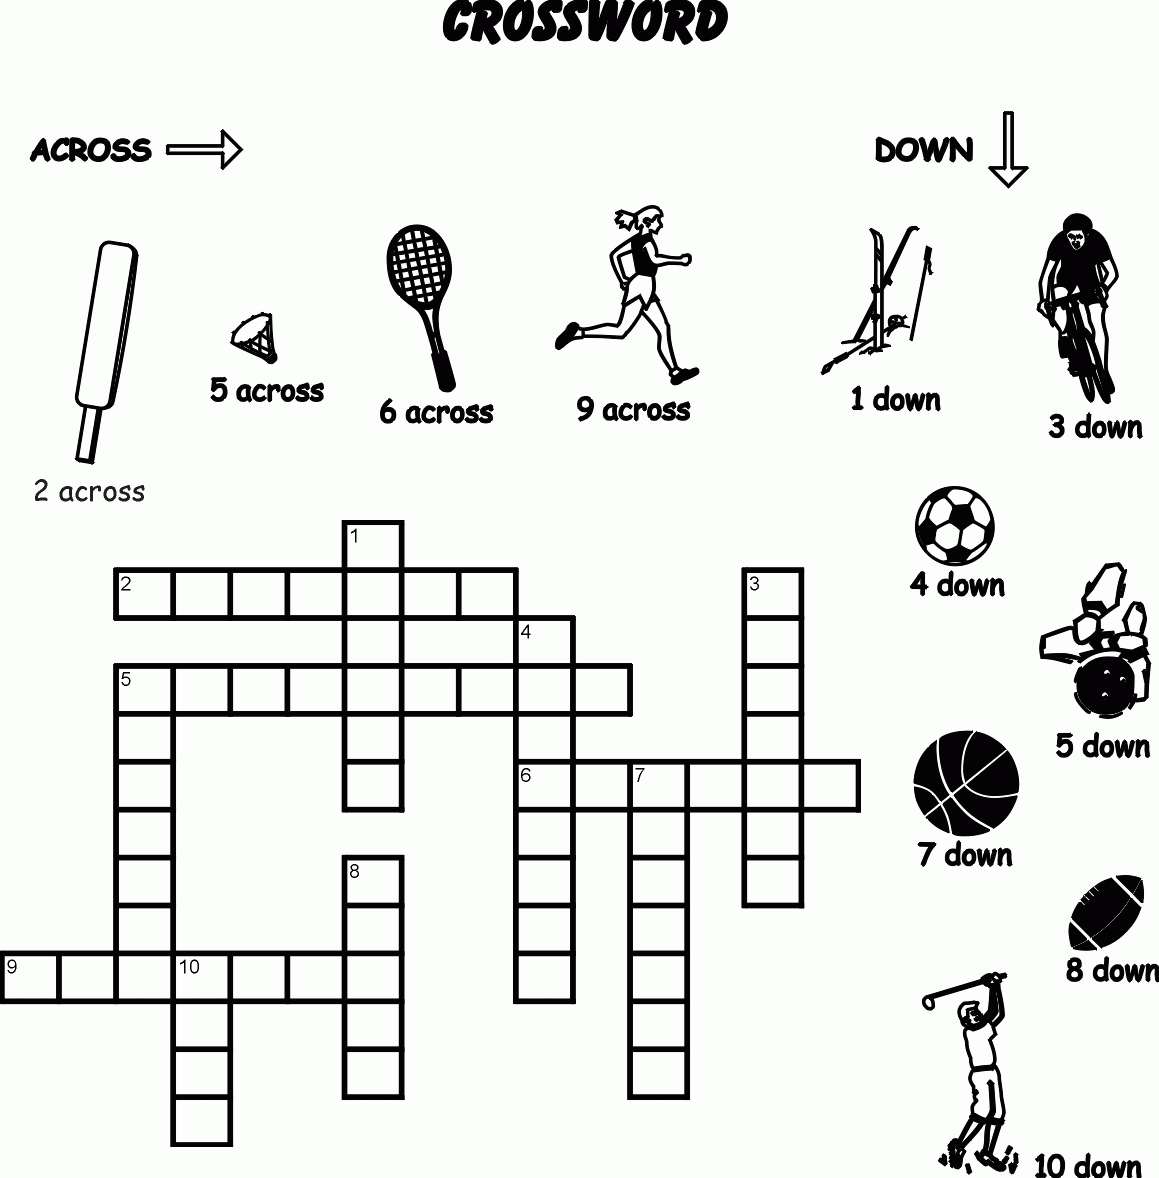 14 Sports Crossword Puzzles | Kittybabylove - Sports Crossword Puzzles Printable